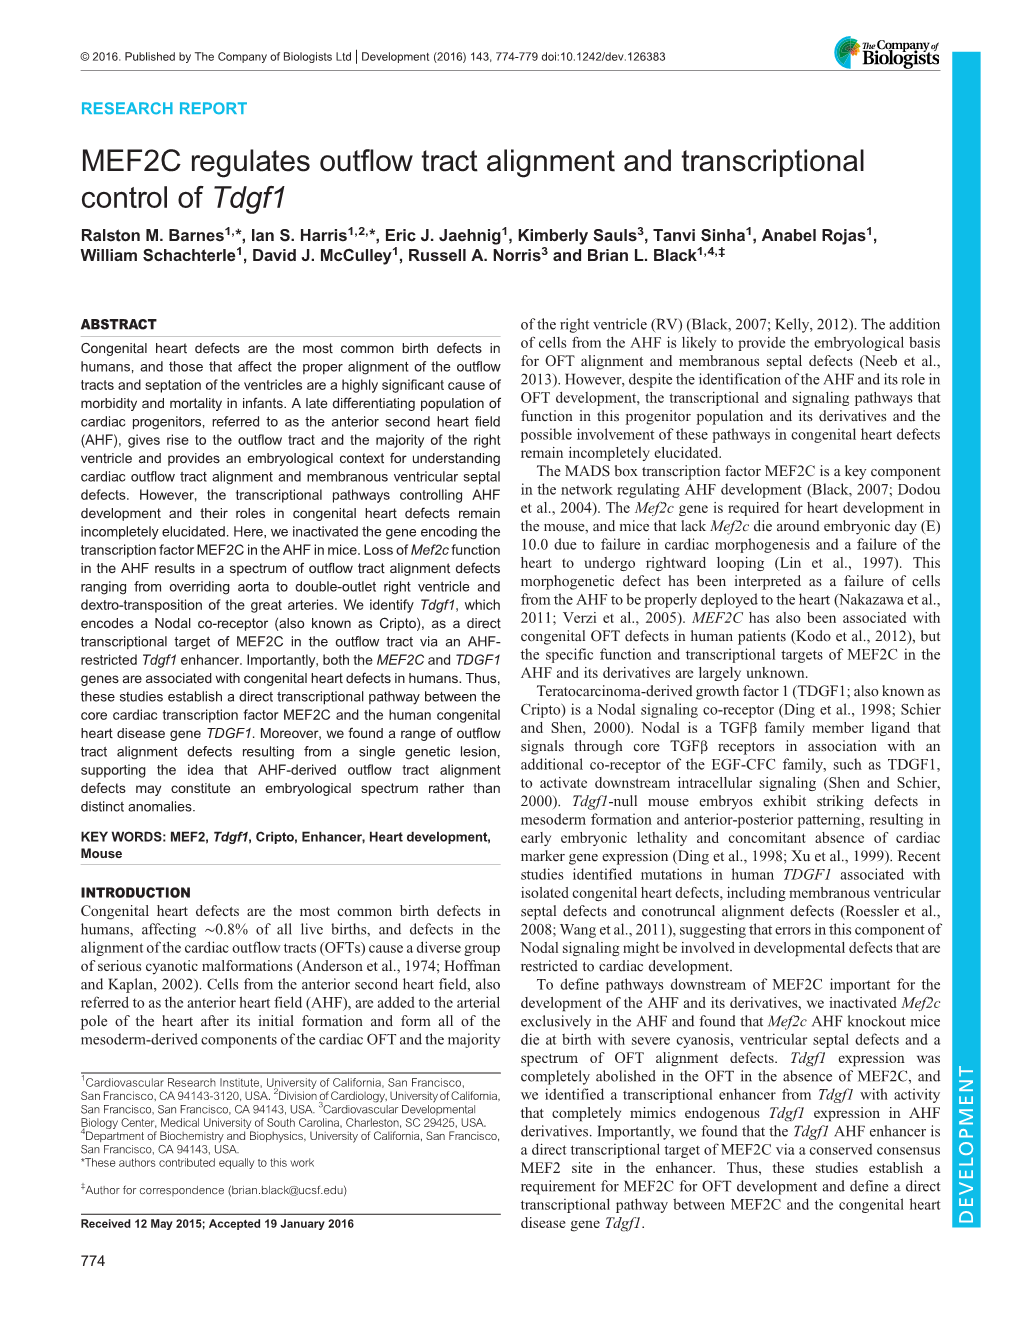 MEF2C Regulates Outflow Tract Alignment and Transcriptional Control of Tdgf1 Ralston M